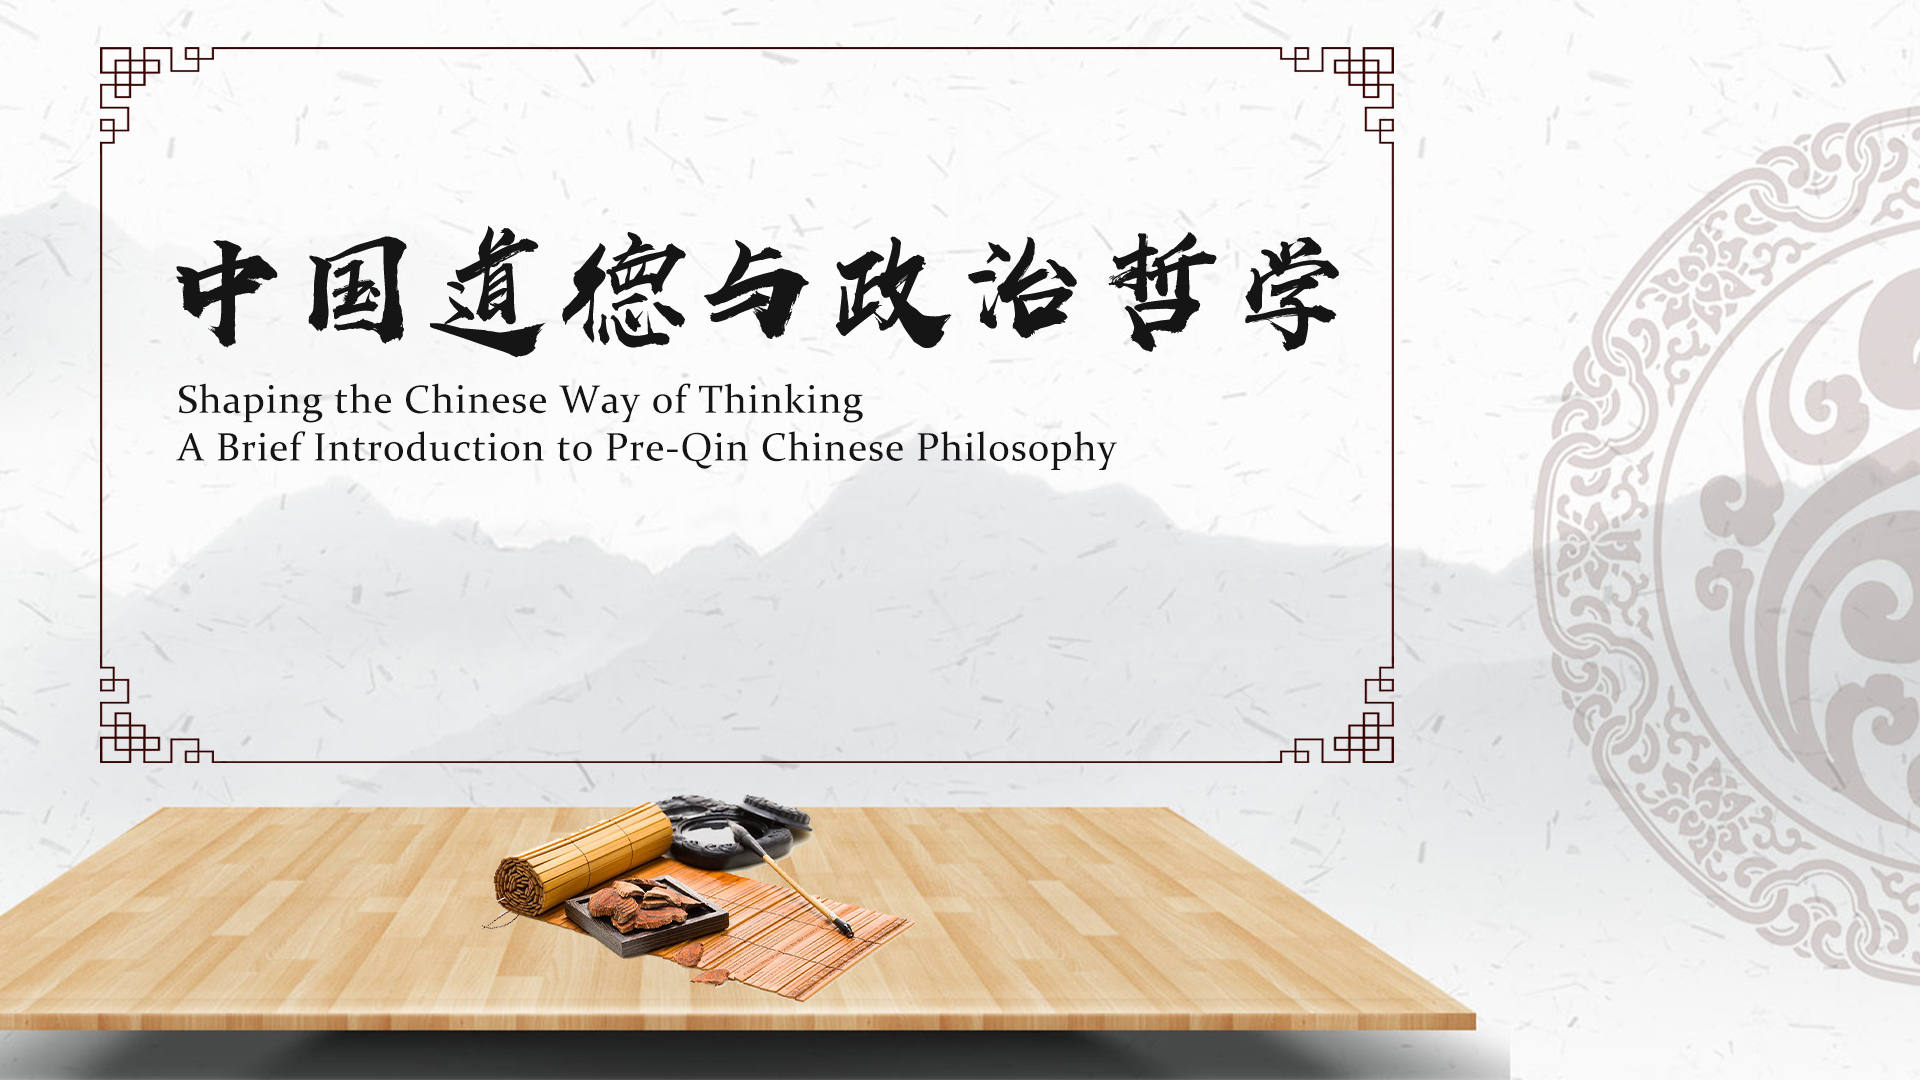 Shaping the Chinese Way of Thinking